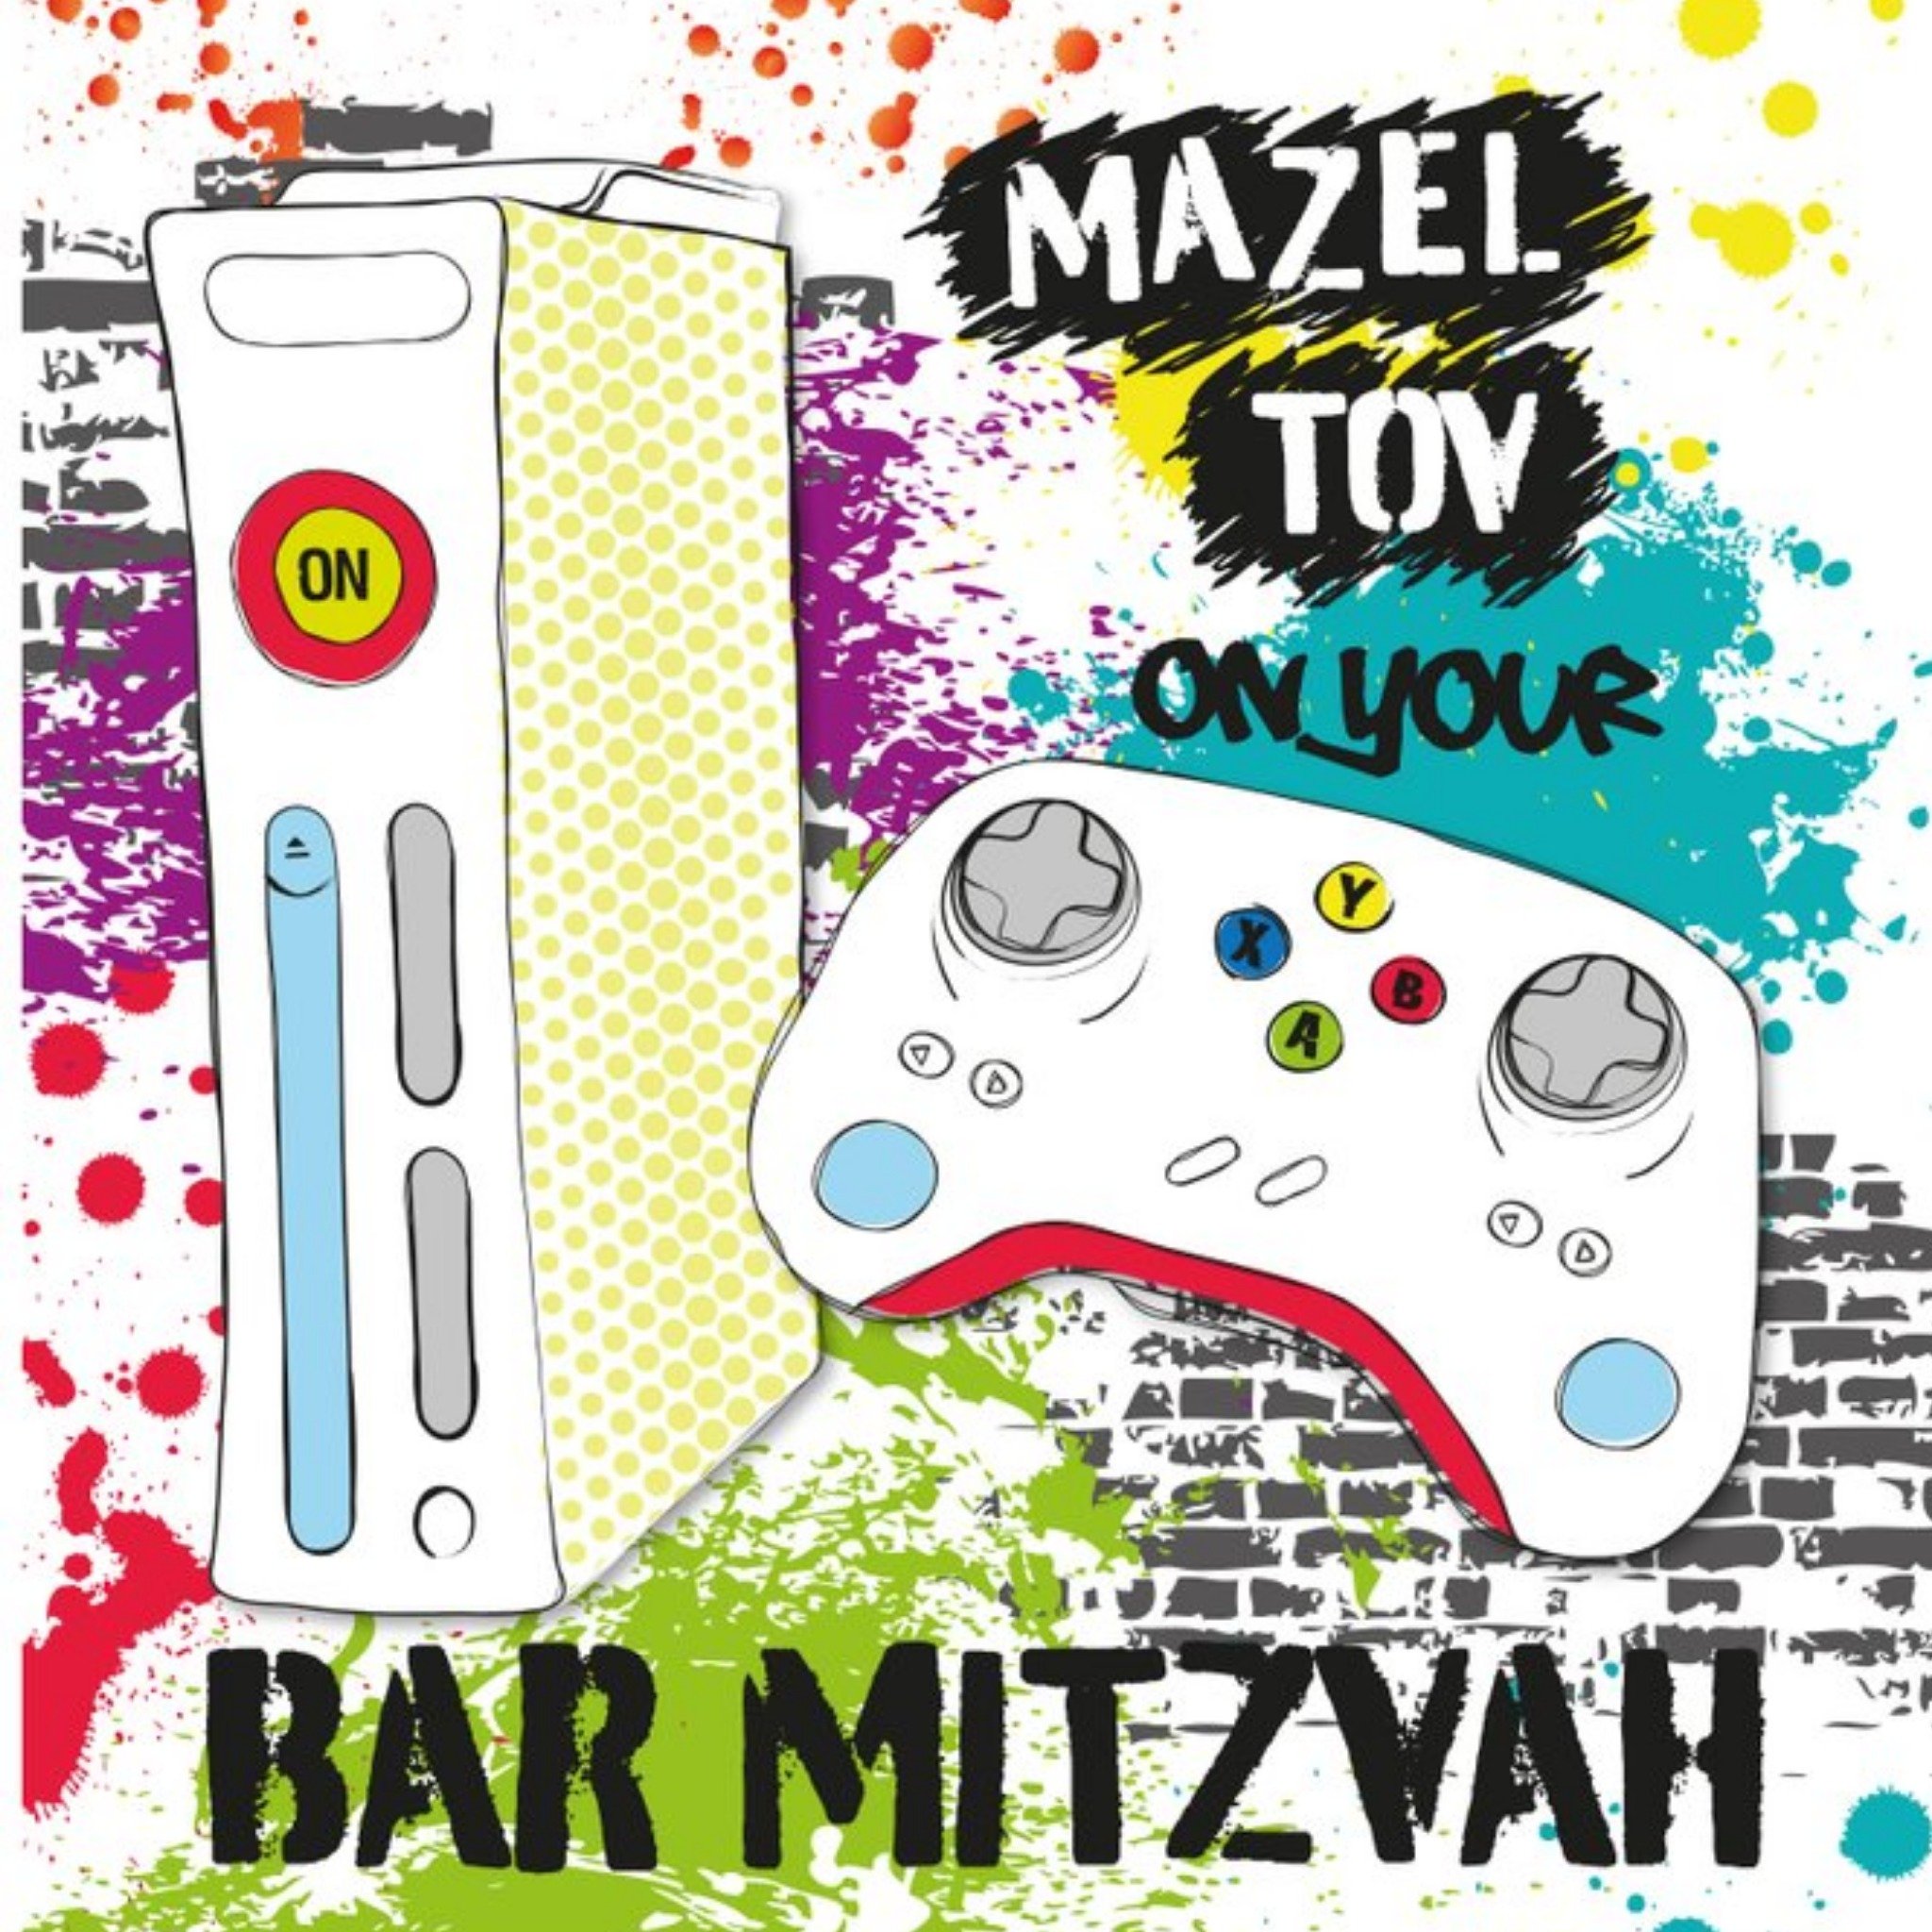 Moonpig Mazel Tov On Your Bar Mitzvah Games Console Card, Large